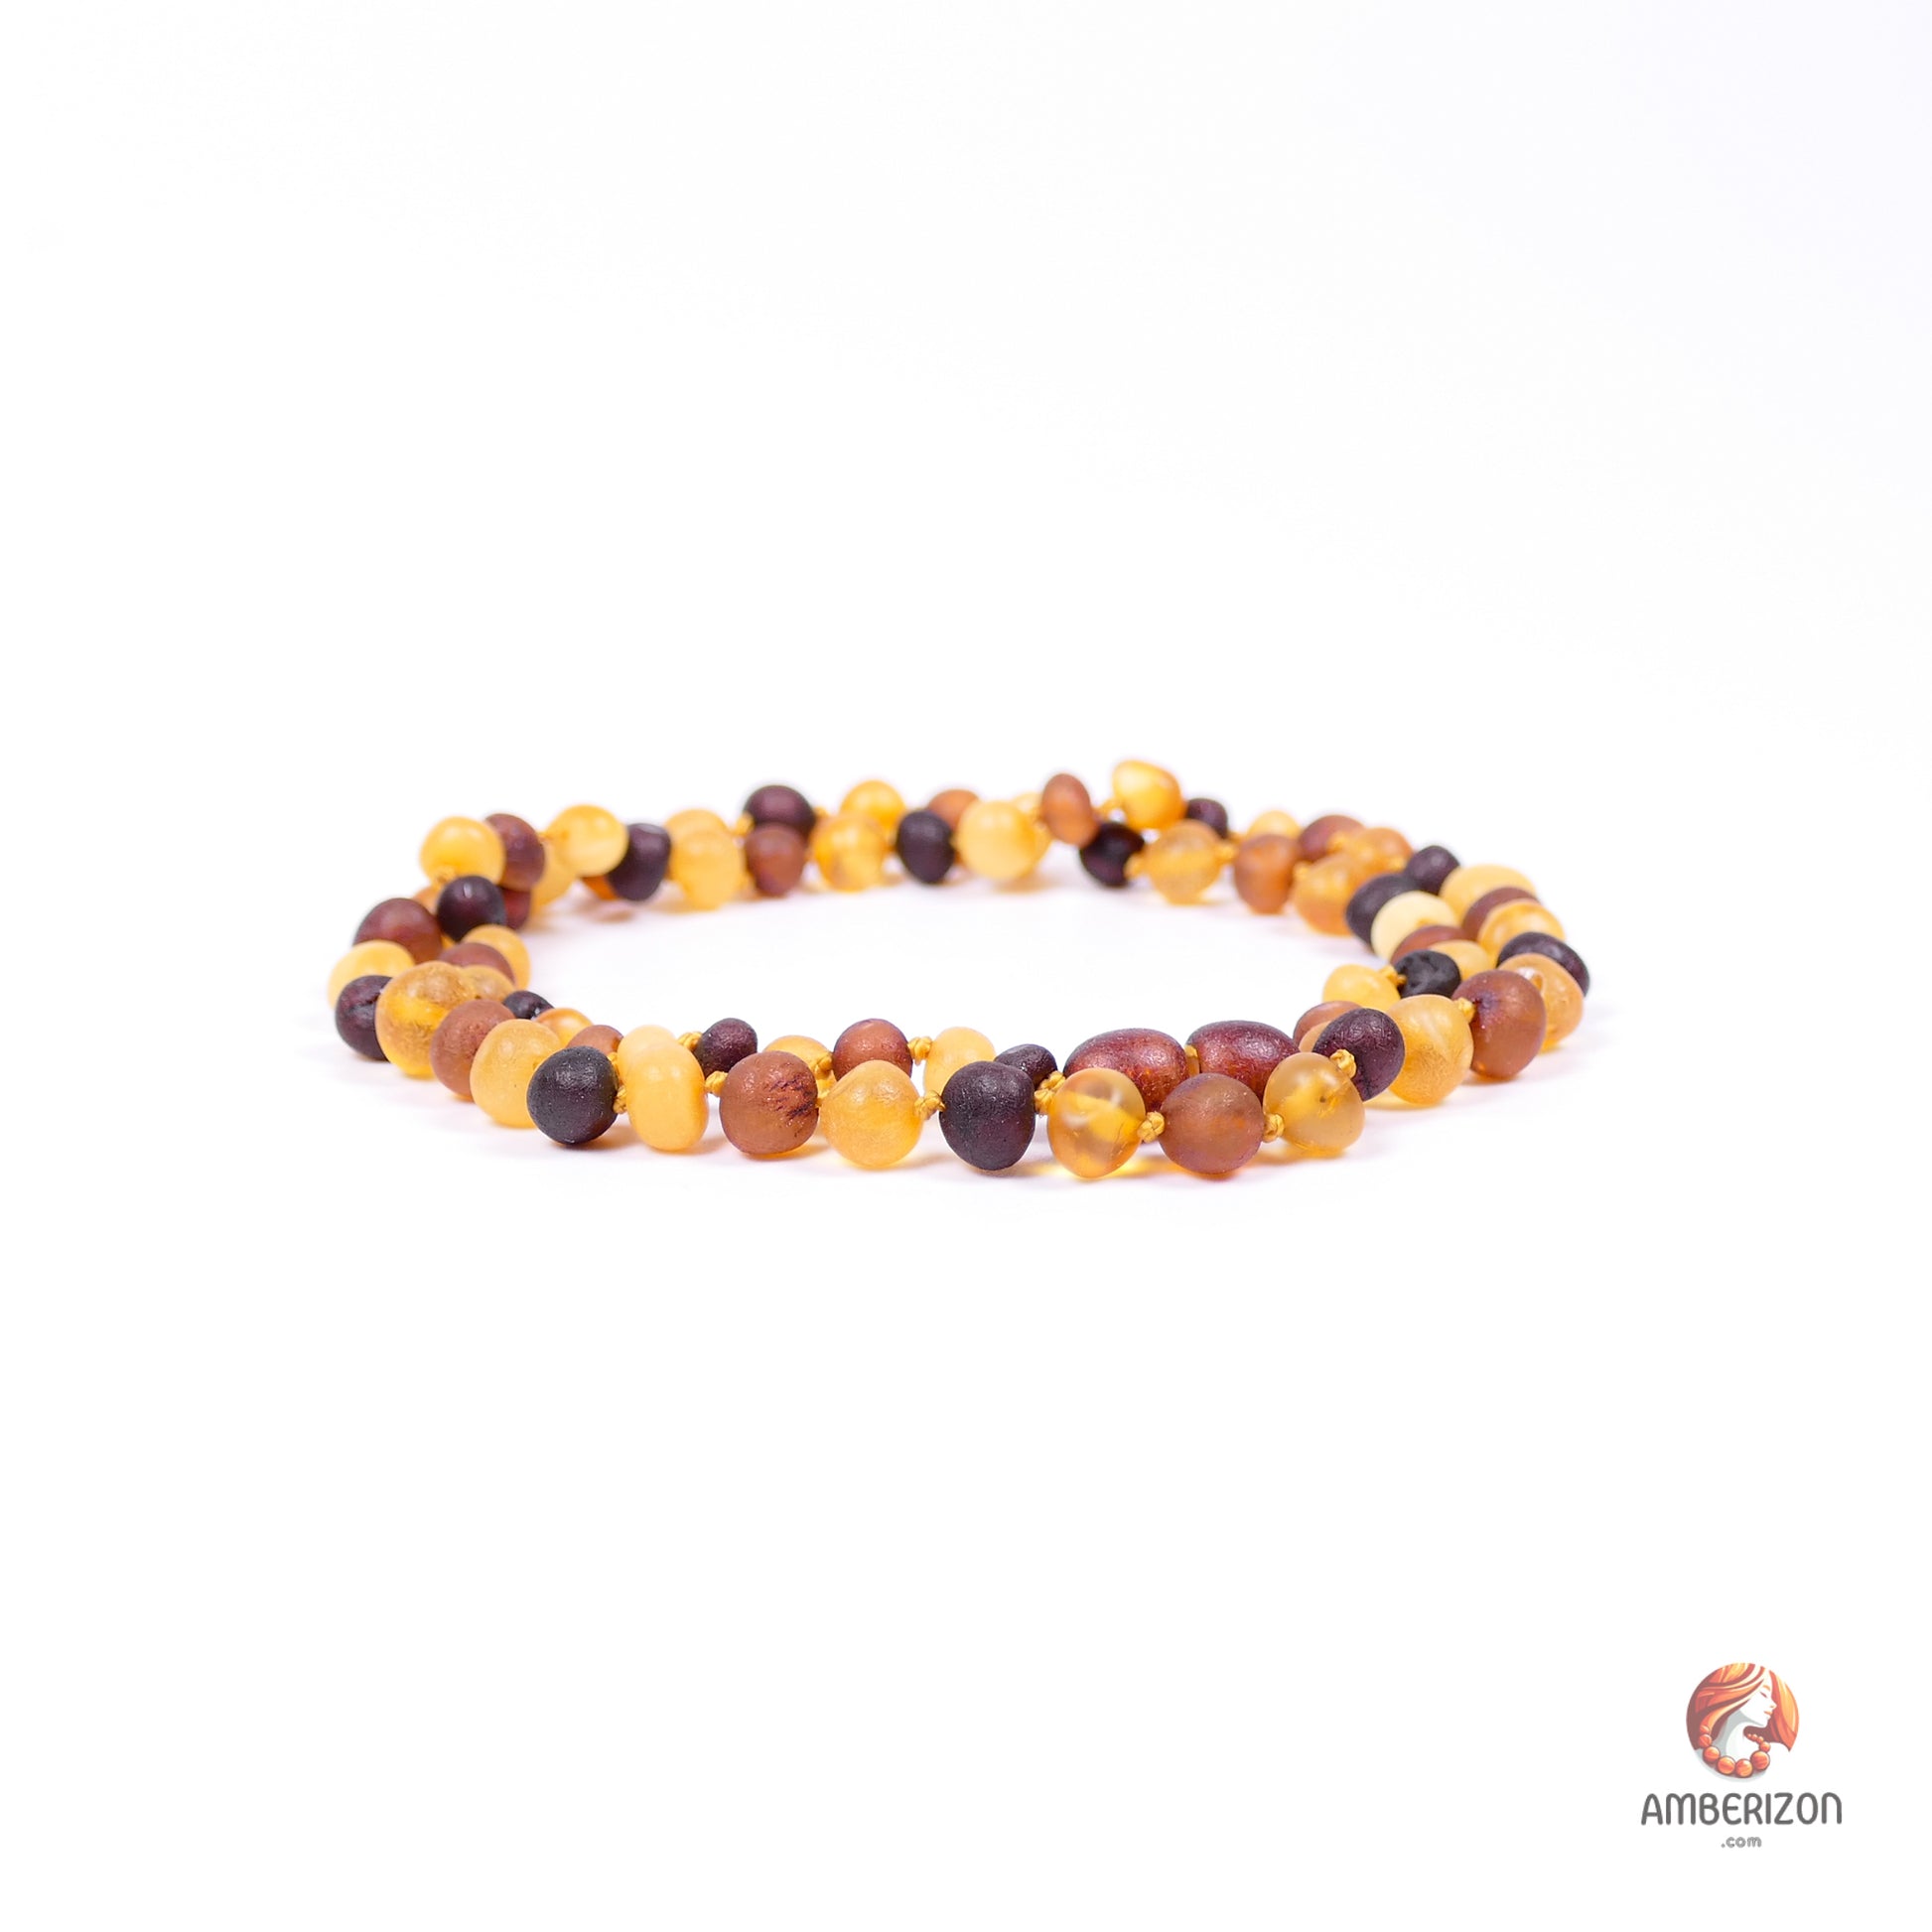 Frosted-style Baltic amber necklace - Raw amber beads - Amber teething necklace for mom